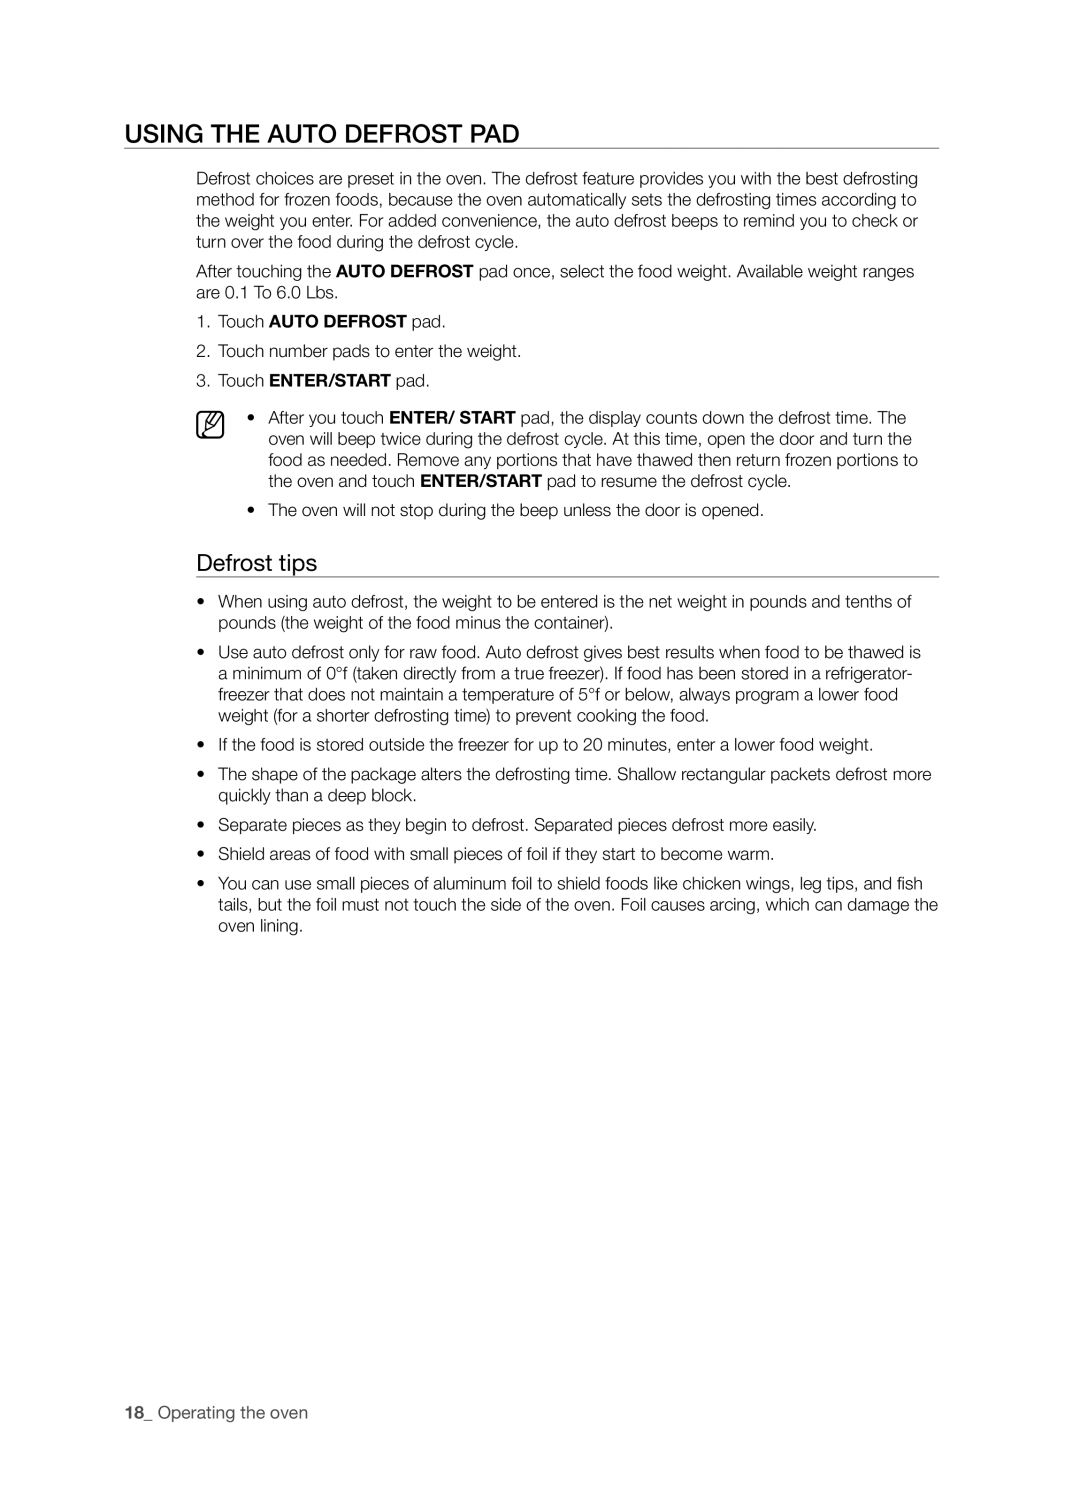 Samsung SMH5165 user manual Using the auto defrost pad, Defrost tips, Operating the oven 